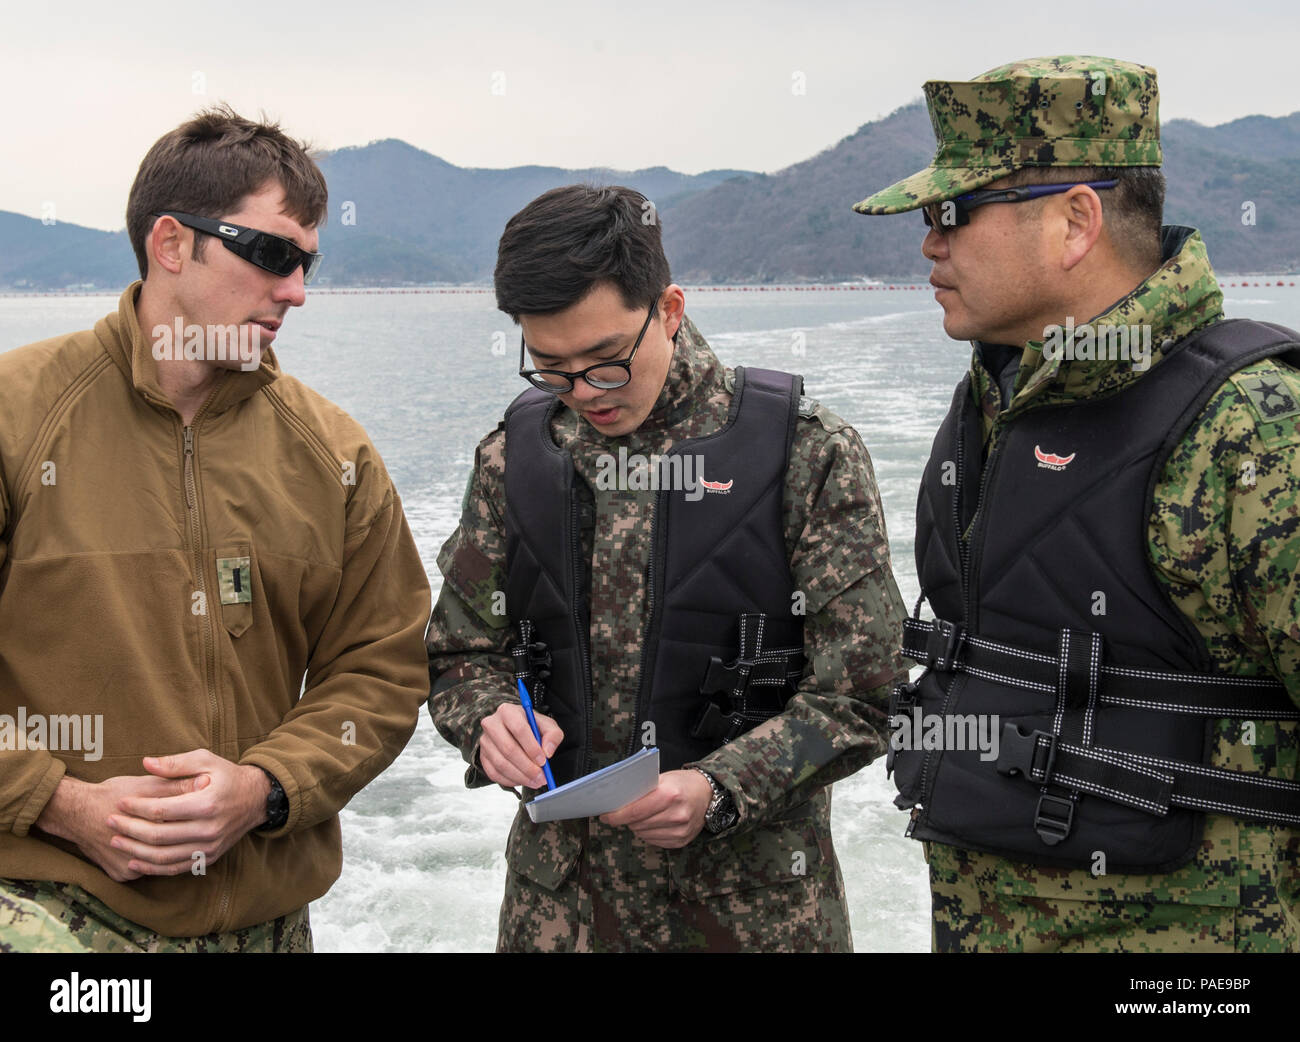 U.S. Navy Lt. j.g. Christopher Gallardo (left), assigned to Explosive Ordnance Disposal Mobile Unit (EODMU) 5, speaks with Republic of Korea (ROK) Rear Adm. Jae Eun Lee (right), commander, ROK Naval Special Warfare Flotilla, off the coast of Jinhae, ROK March 24, 2016, during exercise Foal Eagle 2016. Foal Eagle is an annual, bilateral training exercise designed to enhance the readiness of U.S. and ROK forces, and their ability to work together during a crisis. (U.S. Navy combat camera photo by Mass Communication Specialist 1st Class Charles E. White/Released) Stock Photo